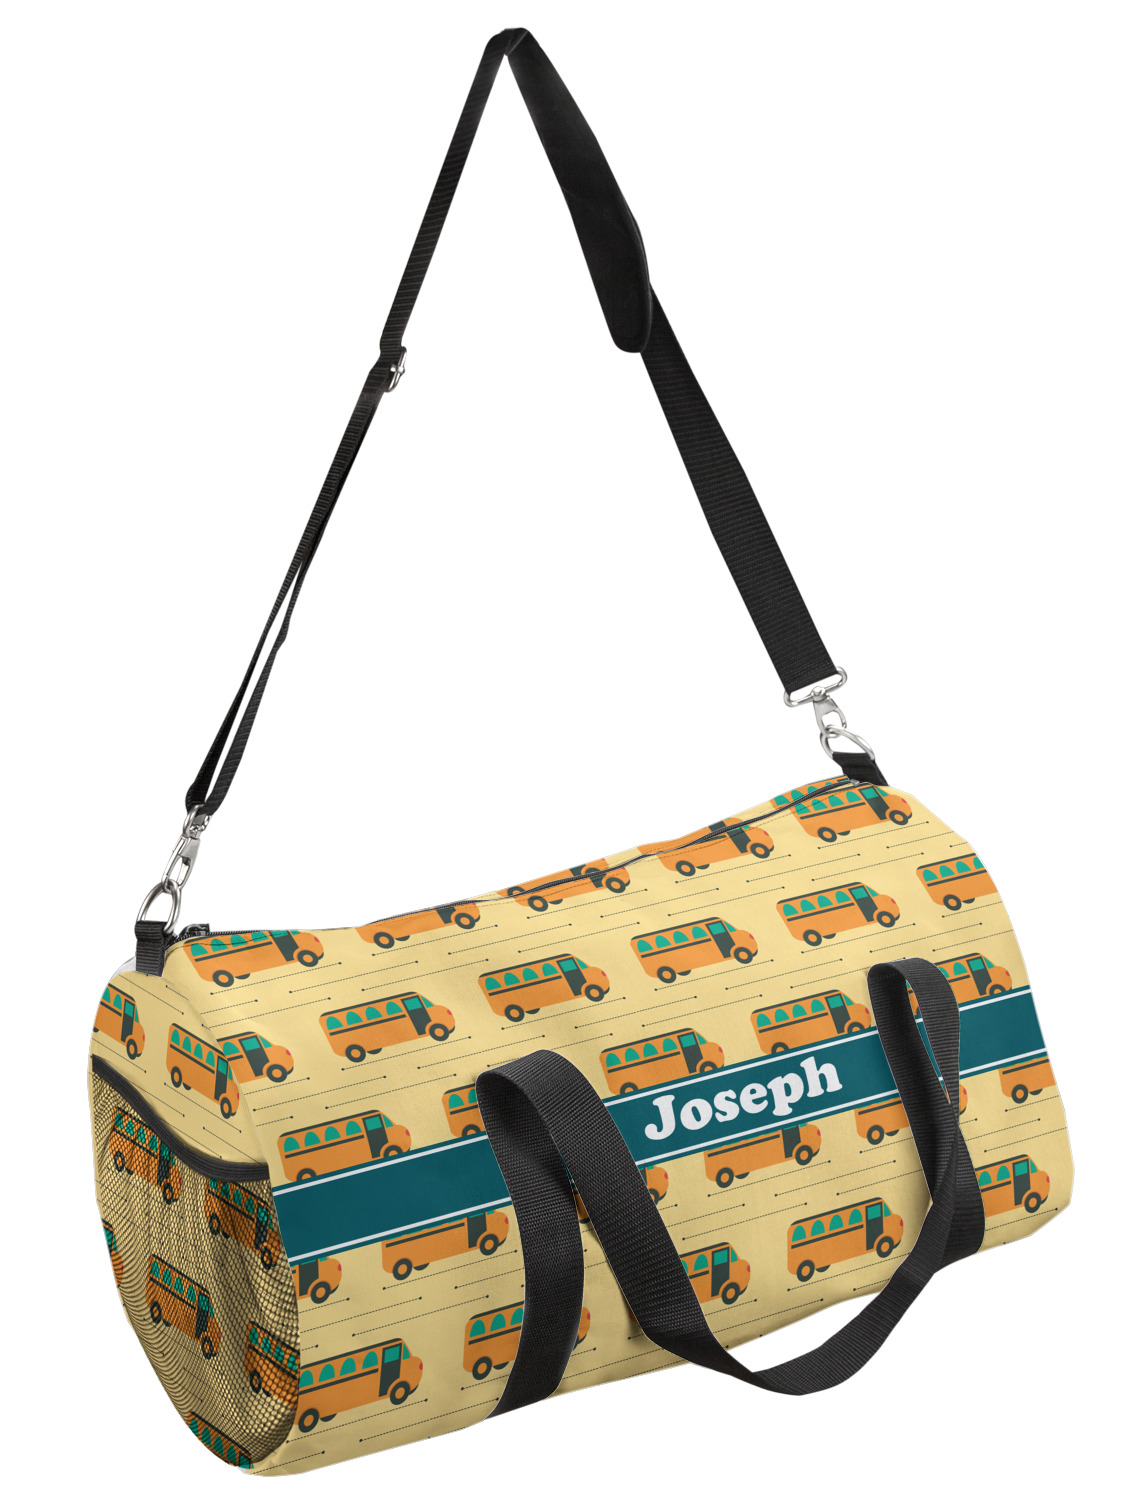 School Bus Duffel Bag - Small (Personalized) - YouCustomizeIt